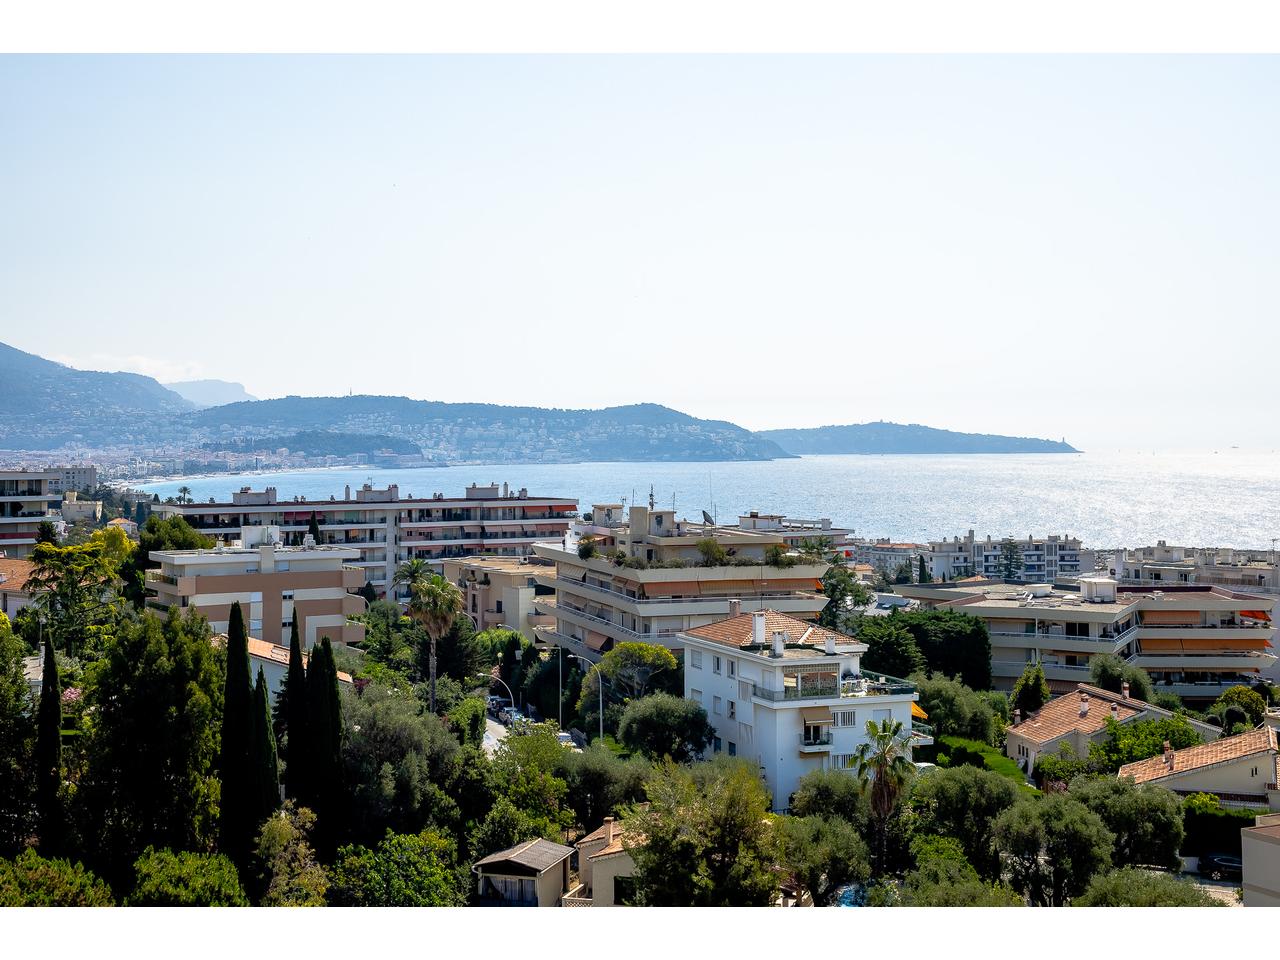 Nice Riviera - Real estate agency Nice Côte d'Azur | Appartement  3 Rooms 113m2  for sale  1 195 000 €